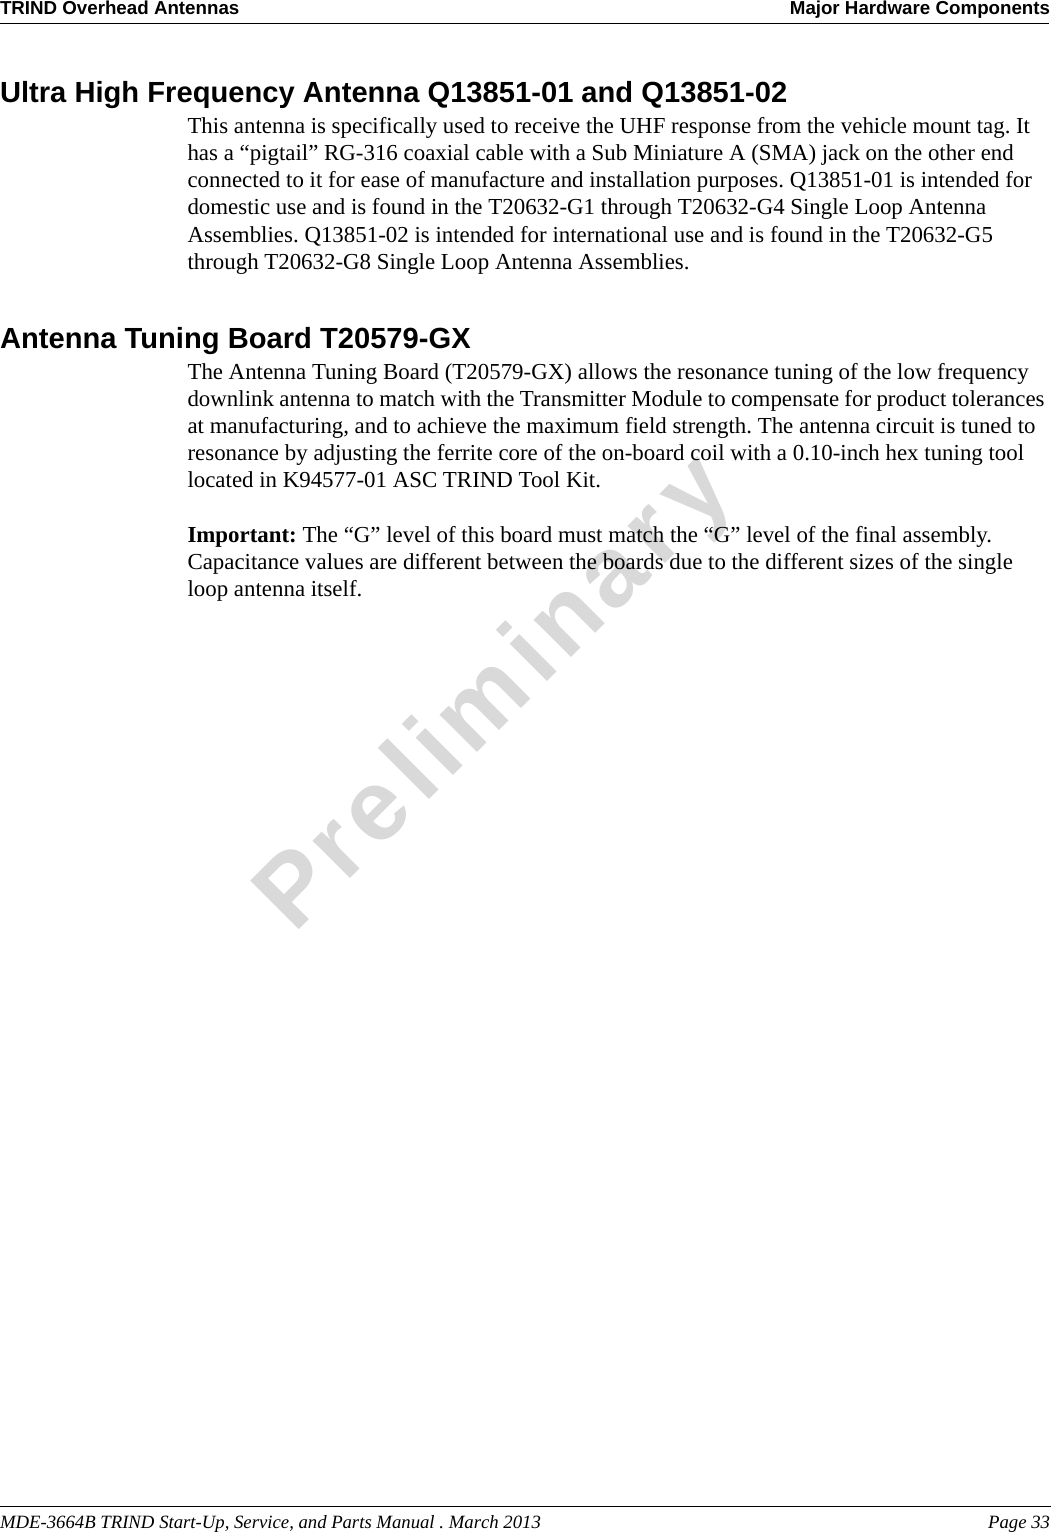 MDE-3664B TRIND Start-Up, Service, and Parts Manual . March 2013 Page 33TRIND Overhead Antennas Major Hardware ComponentsPreliminaryUltra High Frequency Antenna Q13851-01 and Q13851-02This antenna is specifically used to receive the UHF response from the vehicle mount tag. It has a “pigtail” RG-316 coaxial cable with a Sub Miniature A (SMA) jack on the other end connected to it for ease of manufacture and installation purposes. Q13851-01 is intended for domestic use and is found in the T20632-G1 through T20632-G4 Single Loop Antenna Assemblies. Q13851-02 is intended for international use and is found in the T20632-G5 through T20632-G8 Single Loop Antenna Assemblies.Antenna Tuning Board T20579-GXThe Antenna Tuning Board (T20579-GX) allows the resonance tuning of the low frequency downlink antenna to match with the Transmitter Module to compensate for product tolerances at manufacturing, and to achieve the maximum field strength. The antenna circuit is tuned to resonance by adjusting the ferrite core of the on-board coil with a 0.10-inch hex tuning tool located in K94577-01 ASC TRIND Tool Kit. Important: The “G” level of this board must match the “G” level of the final assembly. Capacitance values are different between the boards due to the different sizes of the single loop antenna itself. 